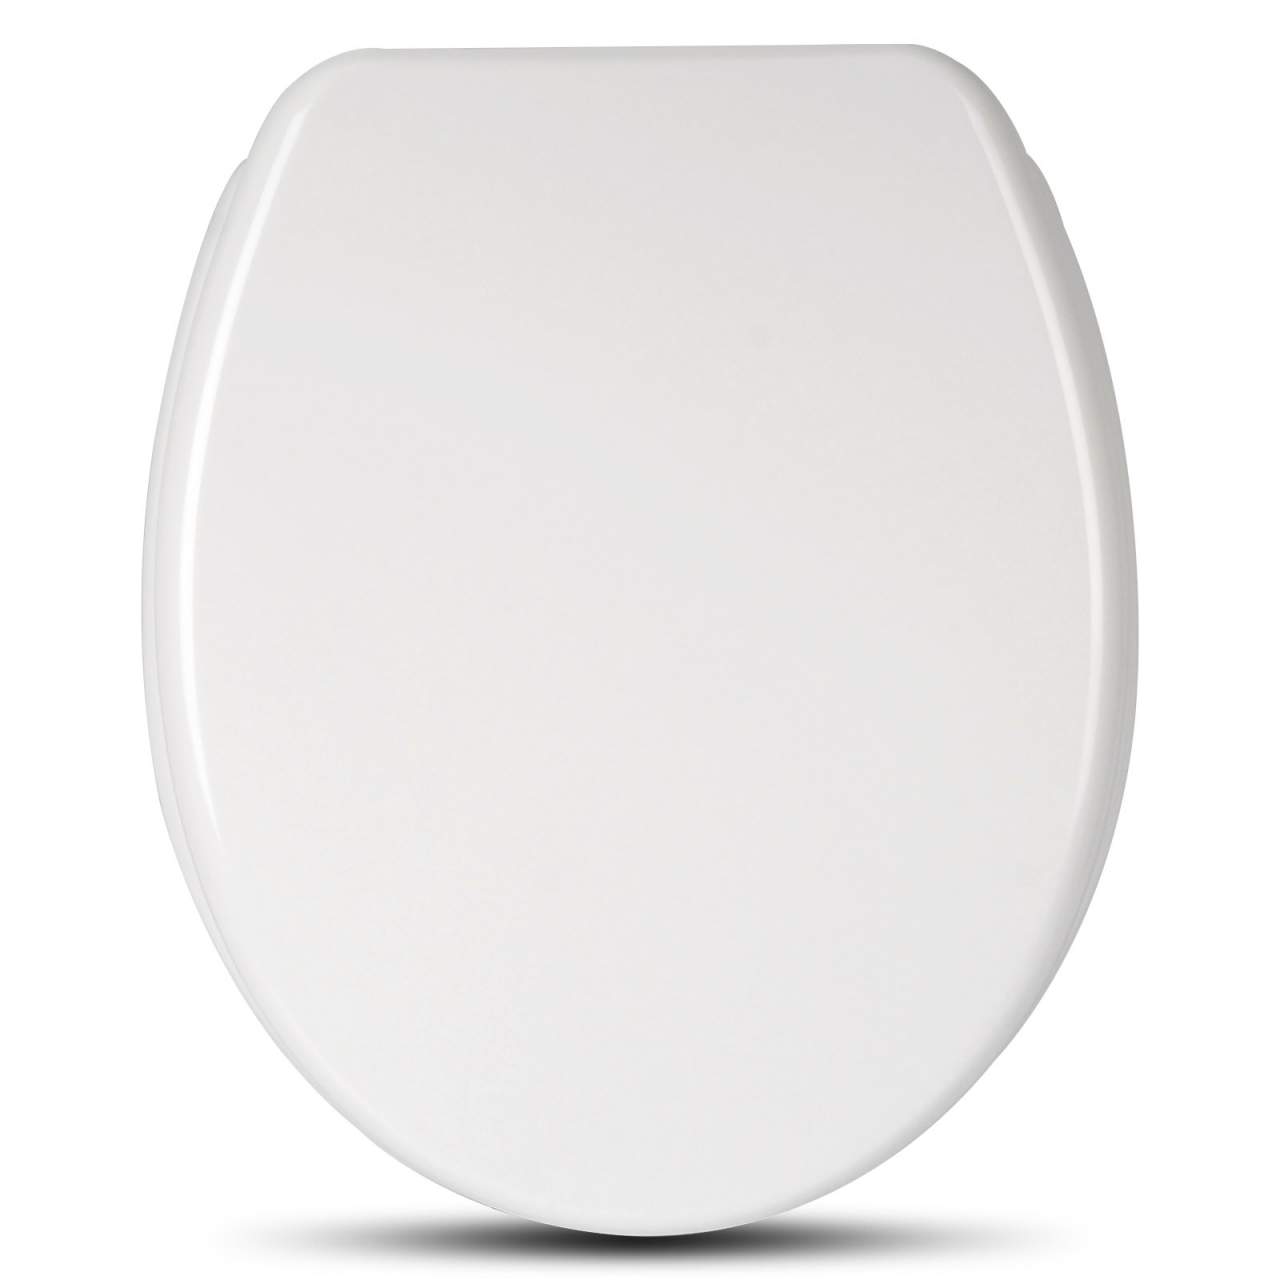 toilet seat without hinges